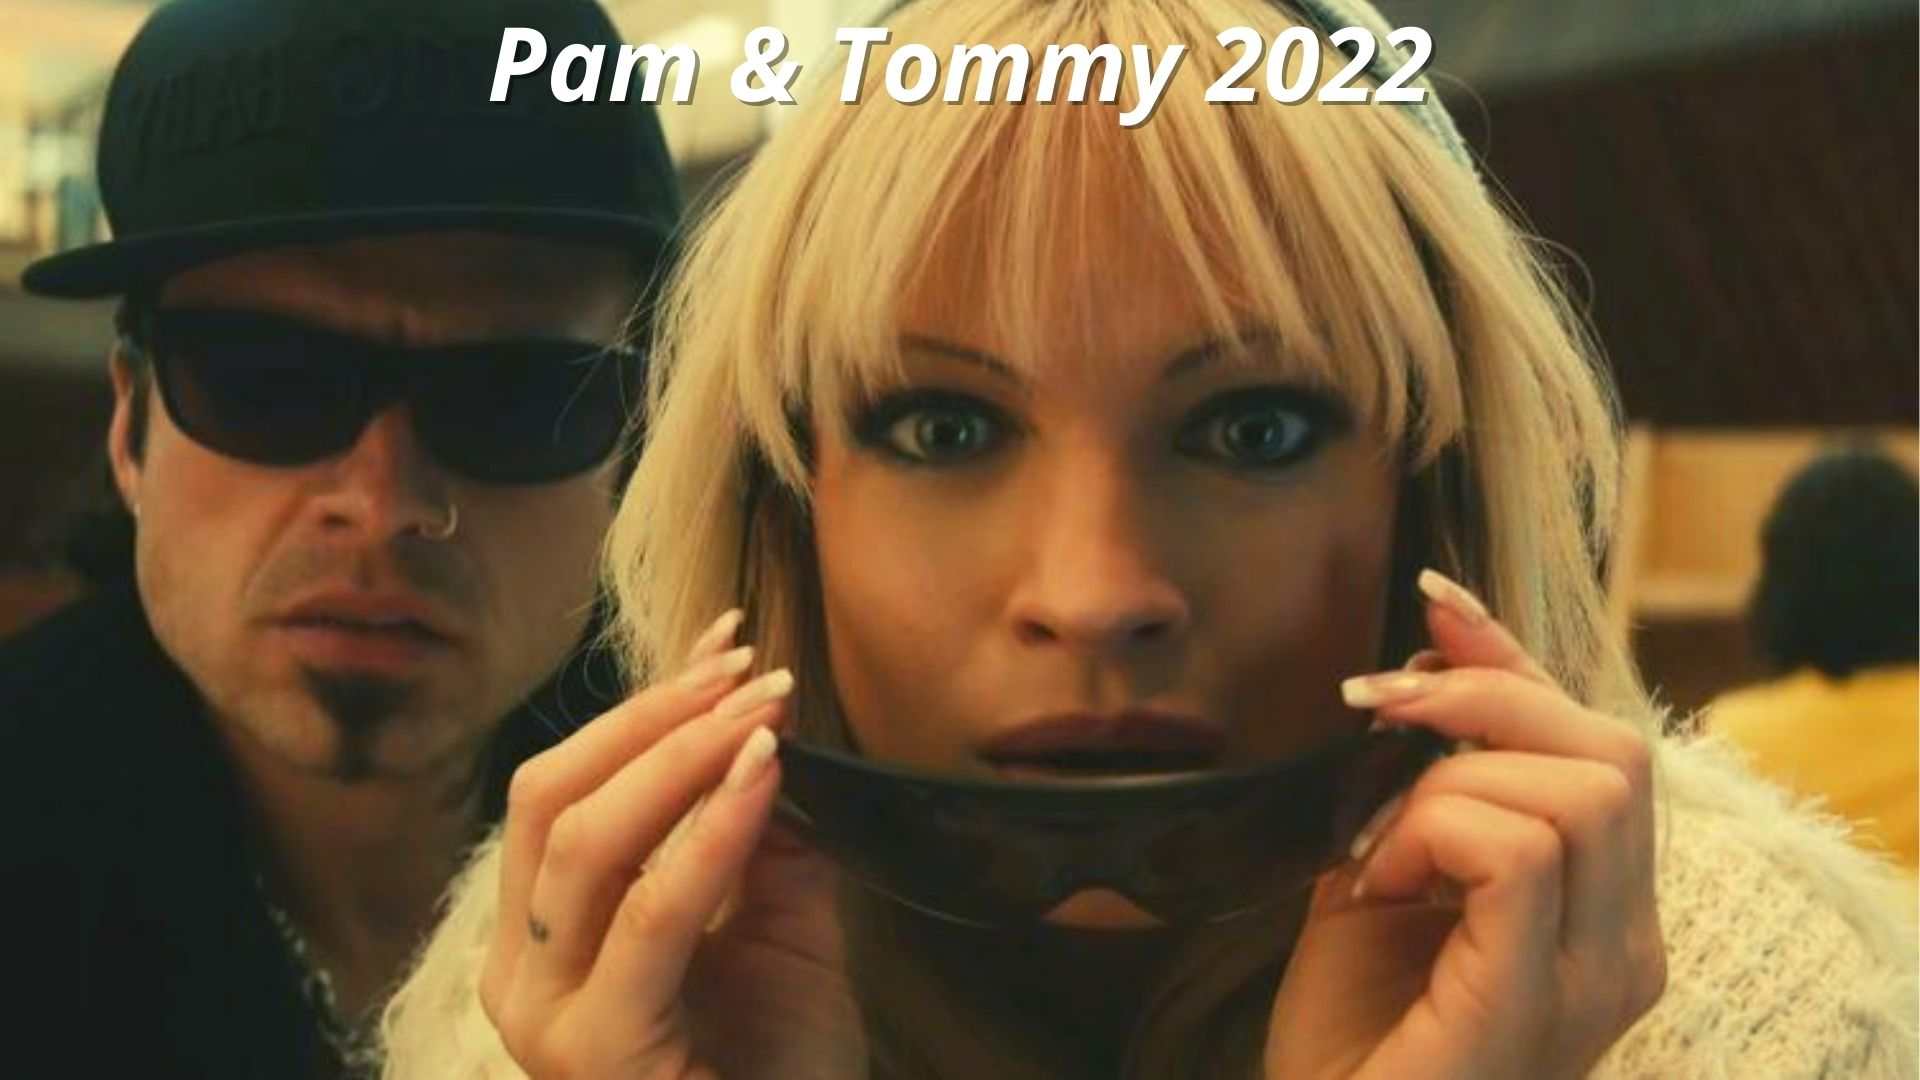 Pam & Tommy 2022 Release Date, Star Cast, Plot, AND Review